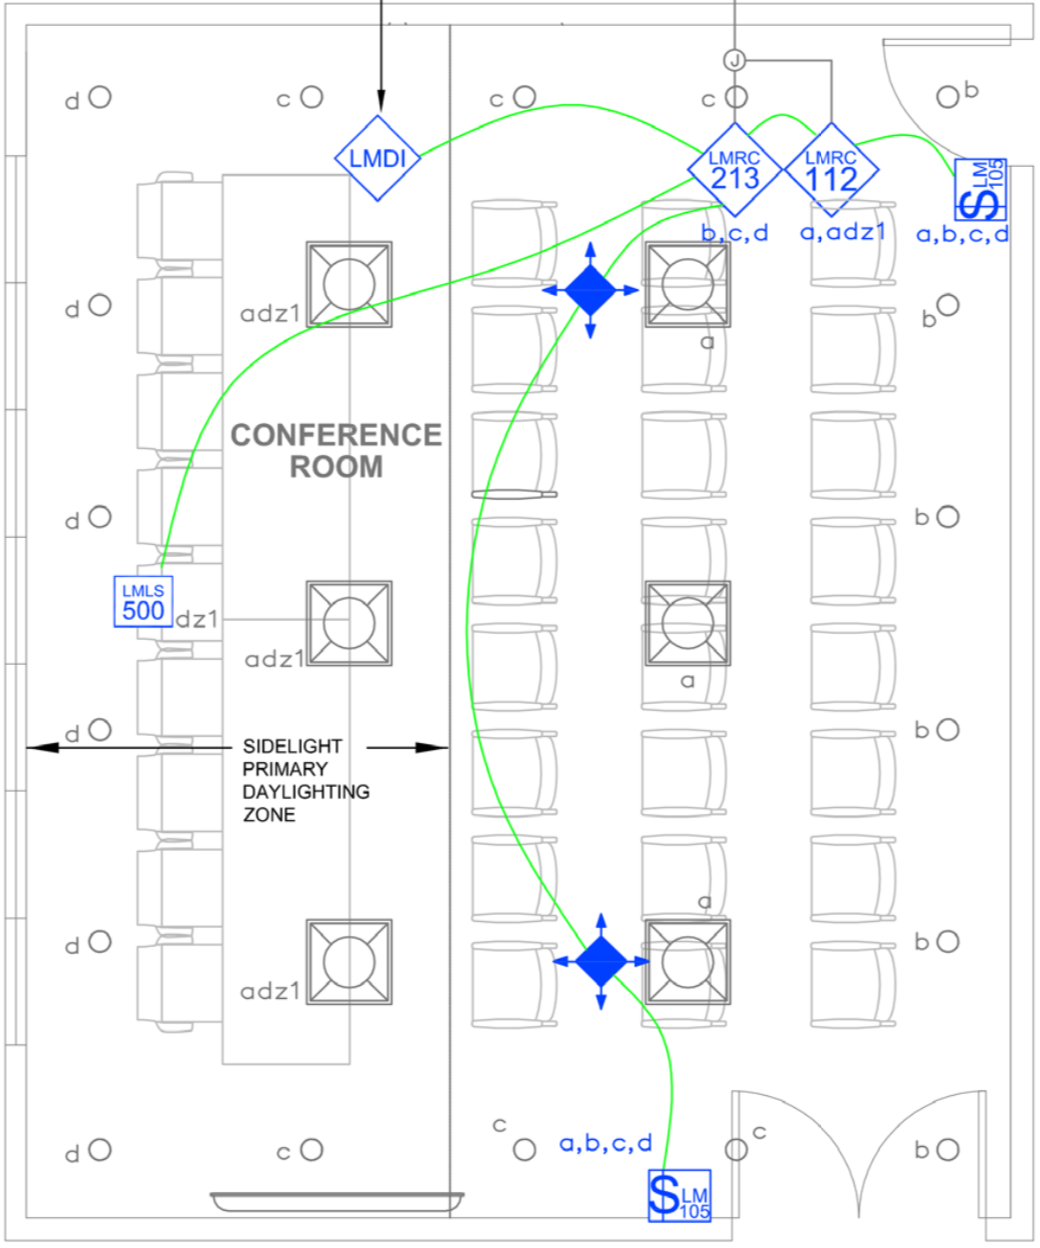 image of Conference Room wired layout